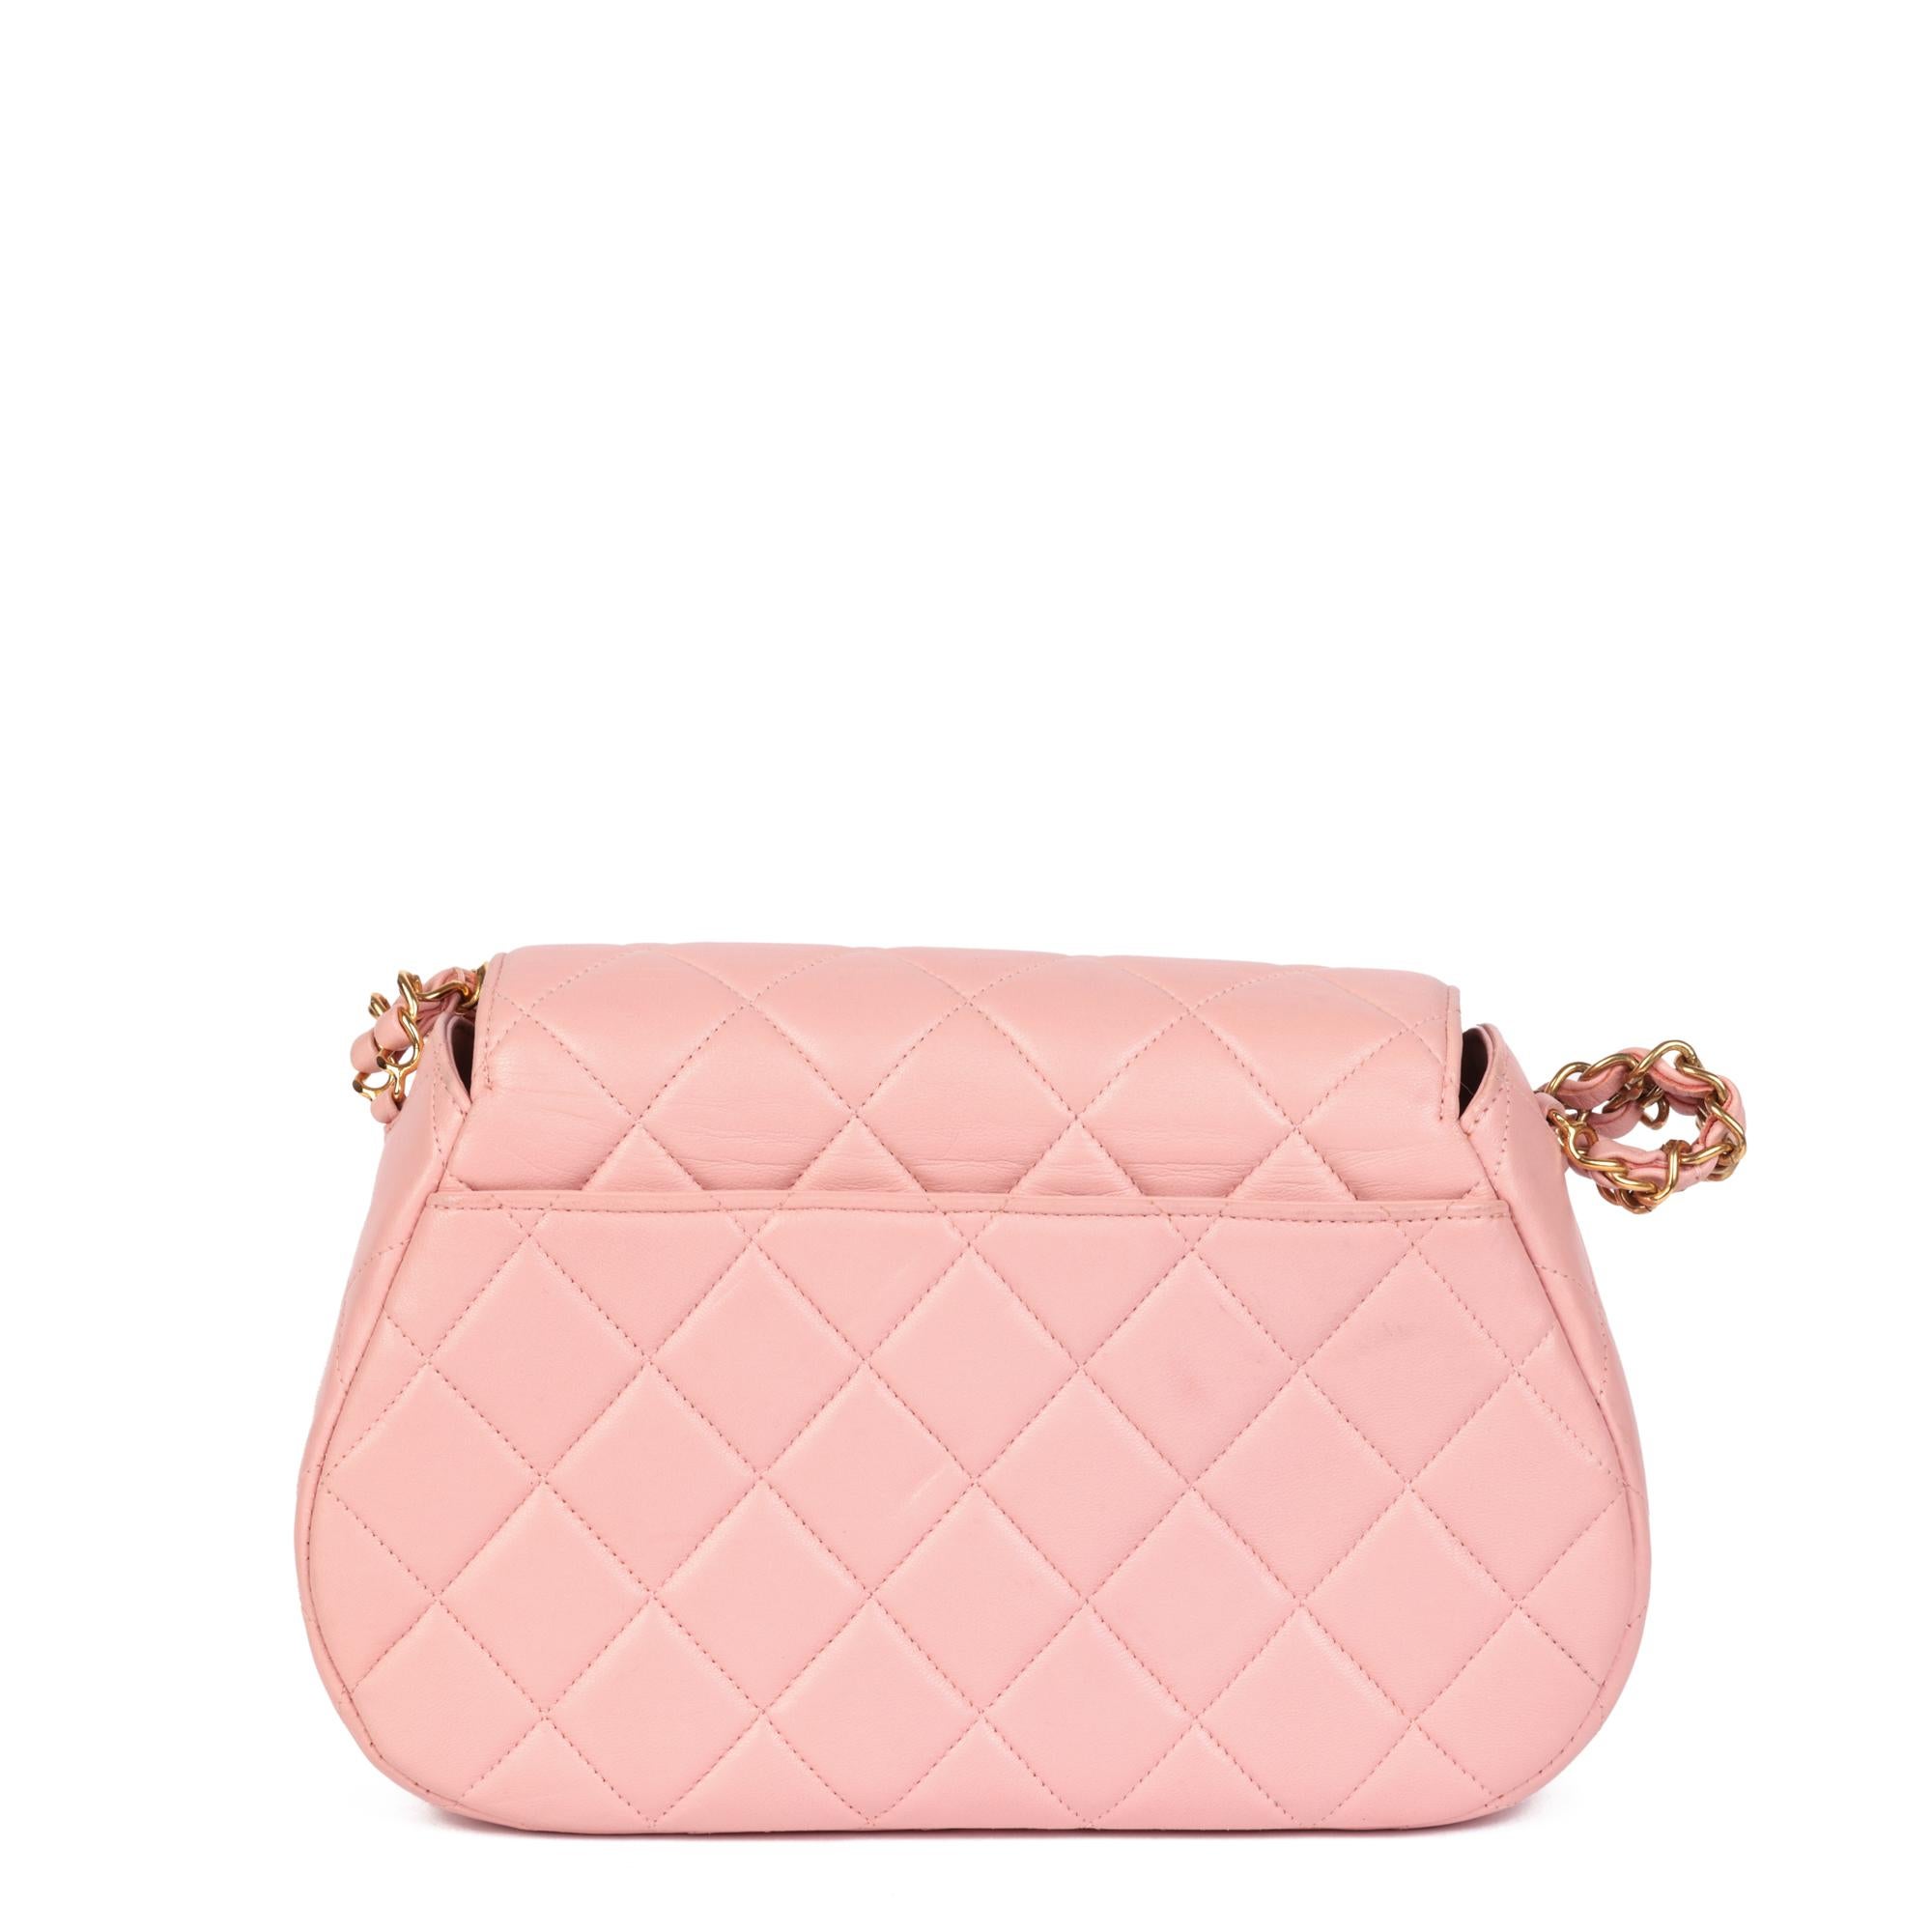 CHANEL Pink Quilted Lambskin Leather Small Top Handle Classic Single Flap Bag For Sale 1